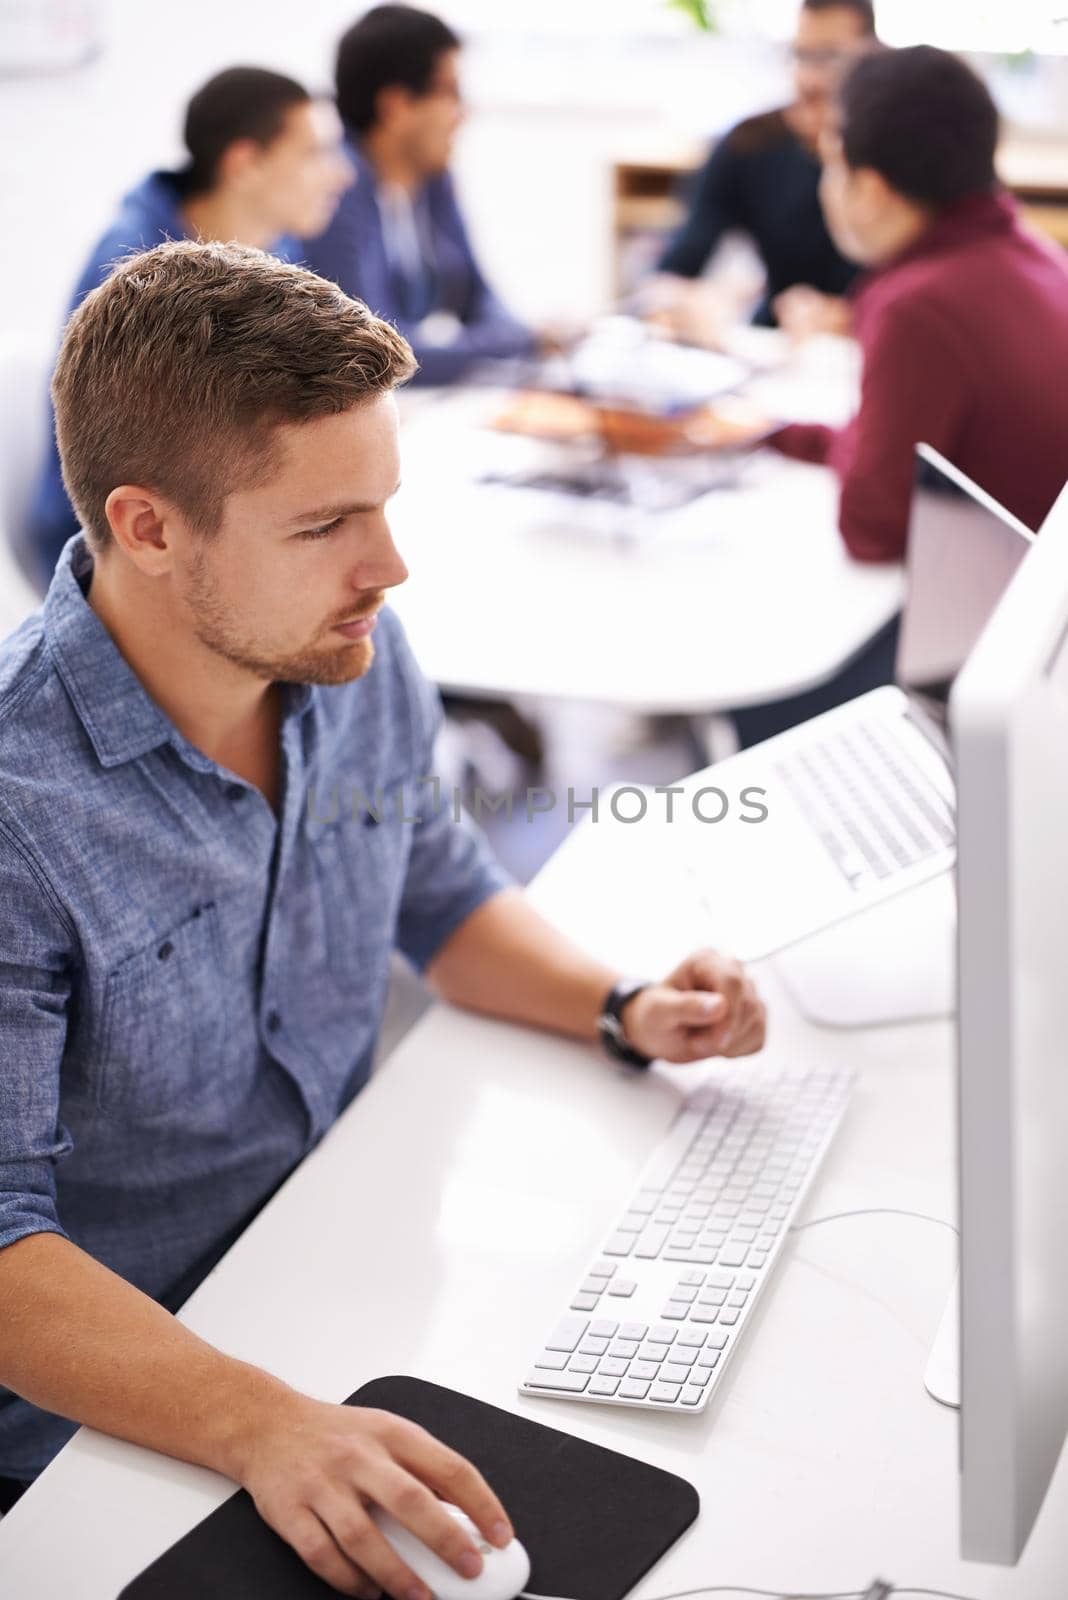 Shot of a young designer working at his computer with colleagues in the background.